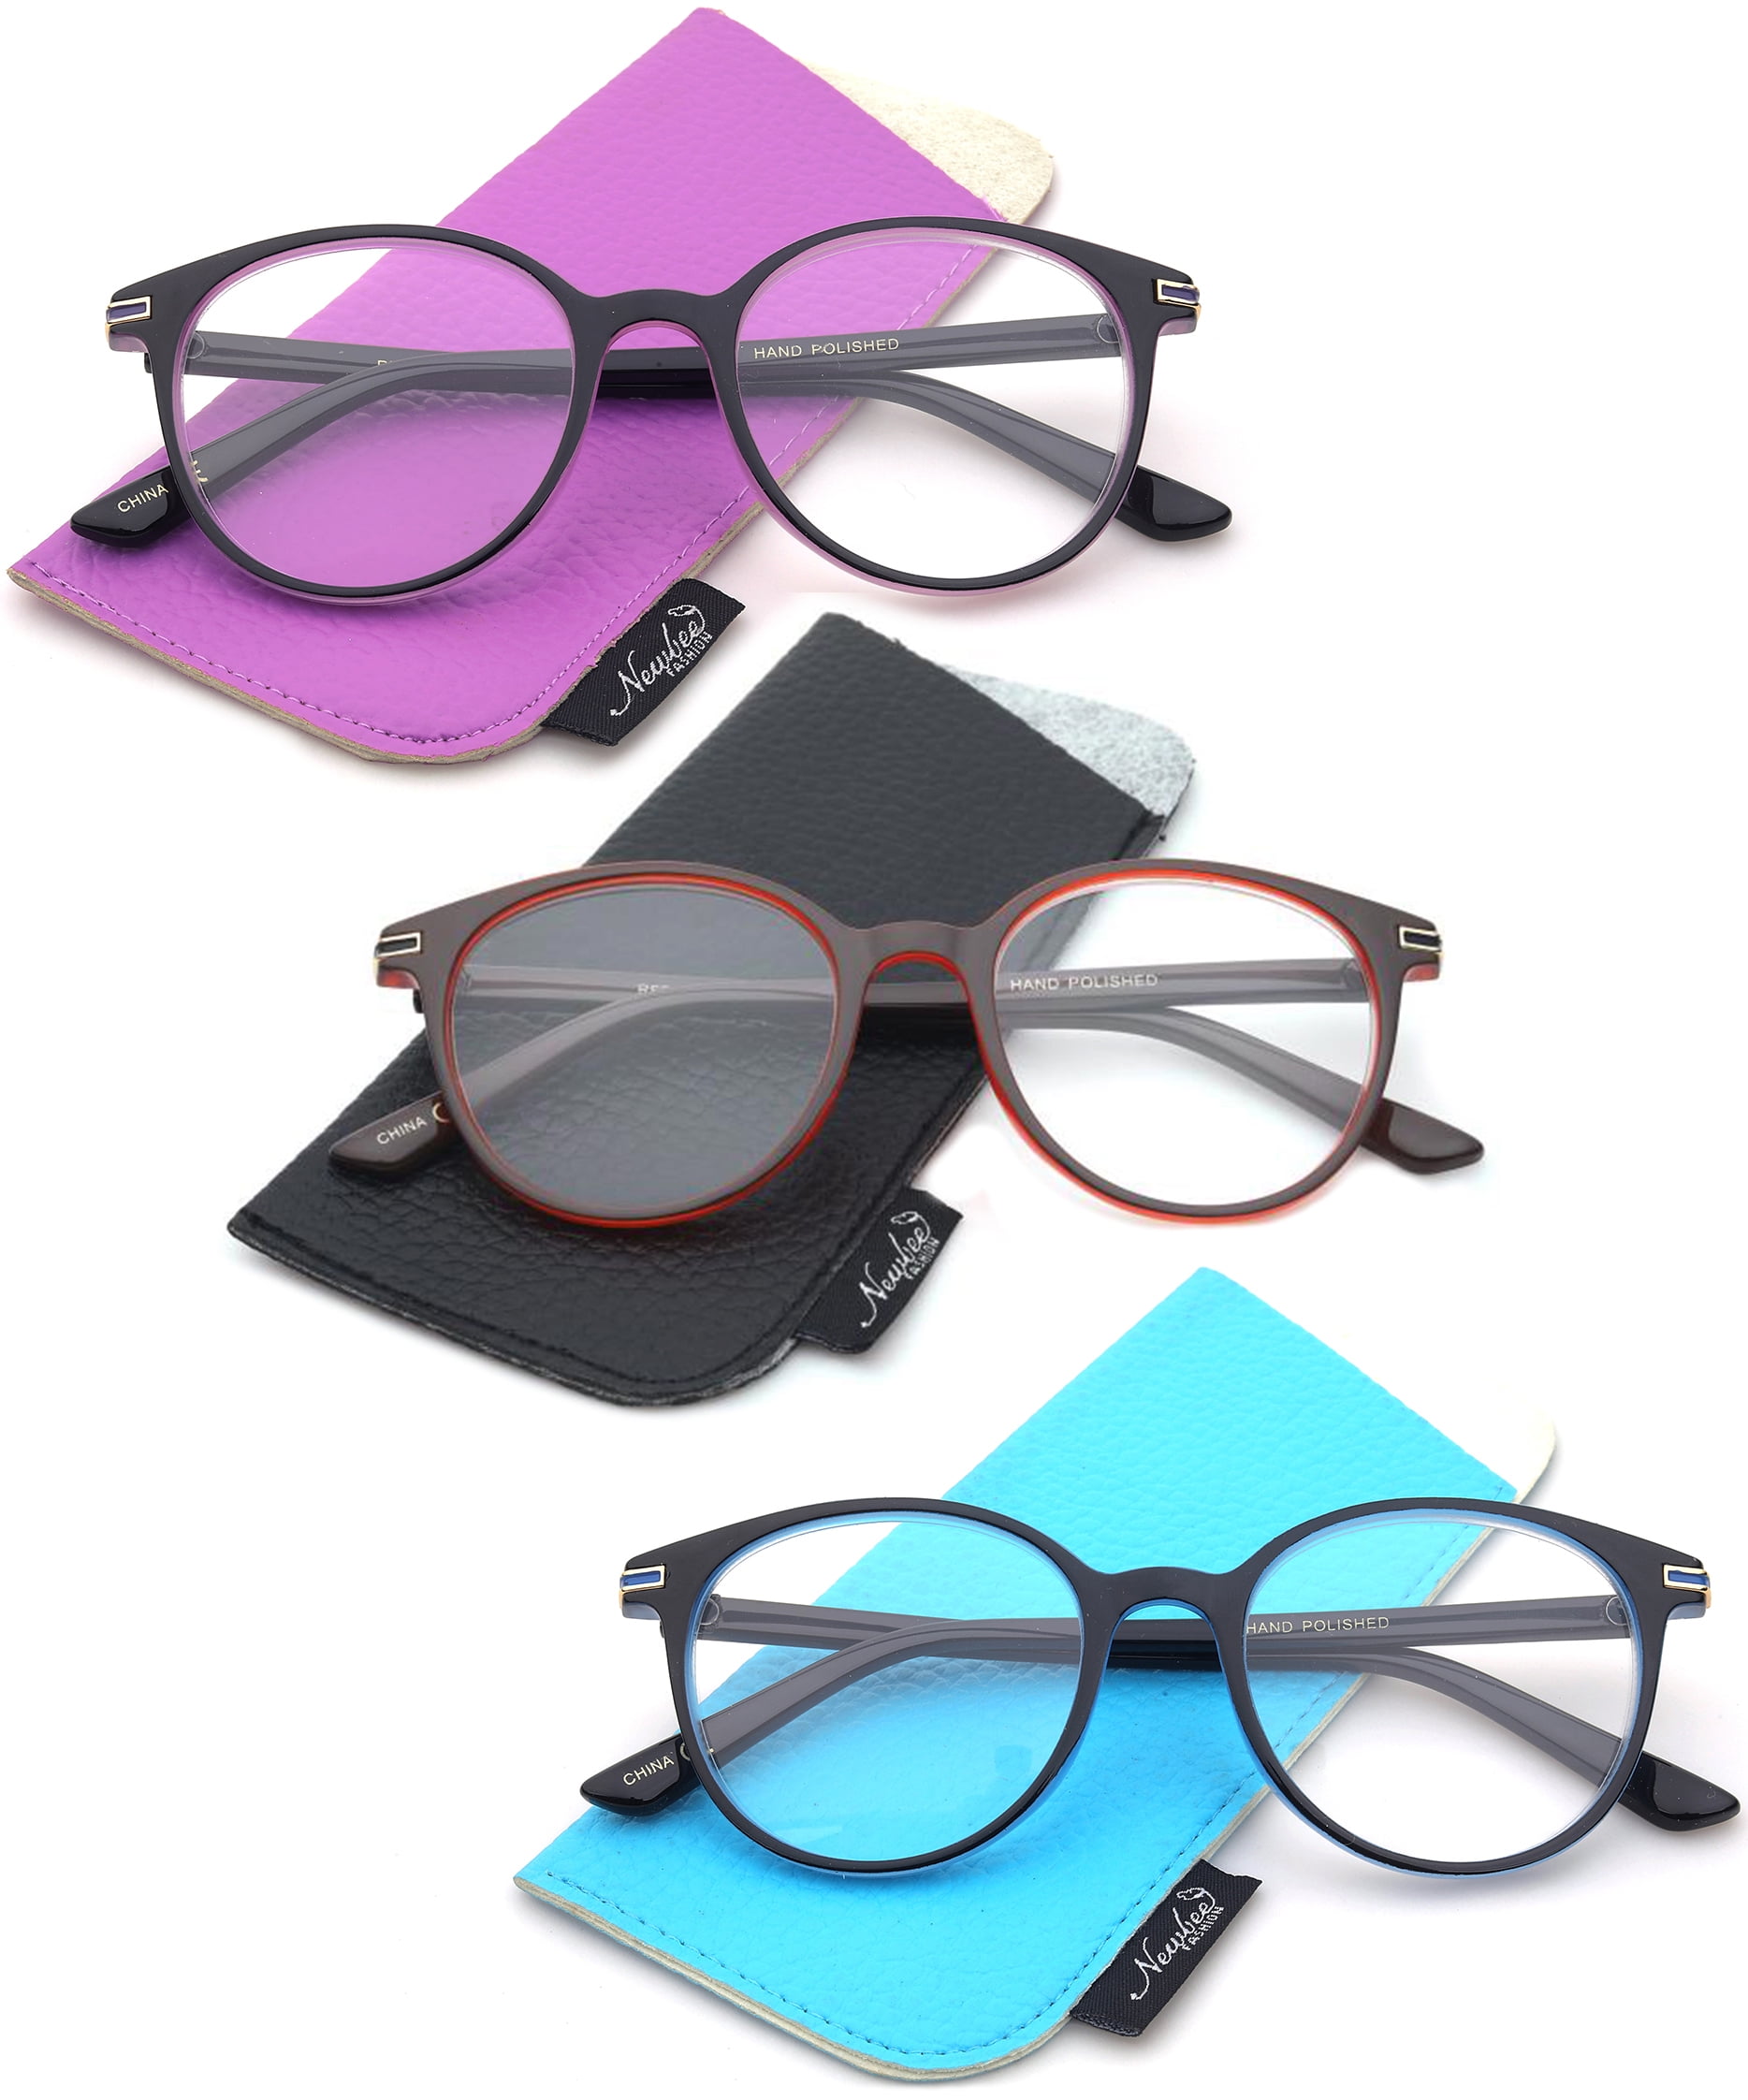 3 Pairs Newbee Fashion Reading Glasses For Women Two Tone Round Vintage